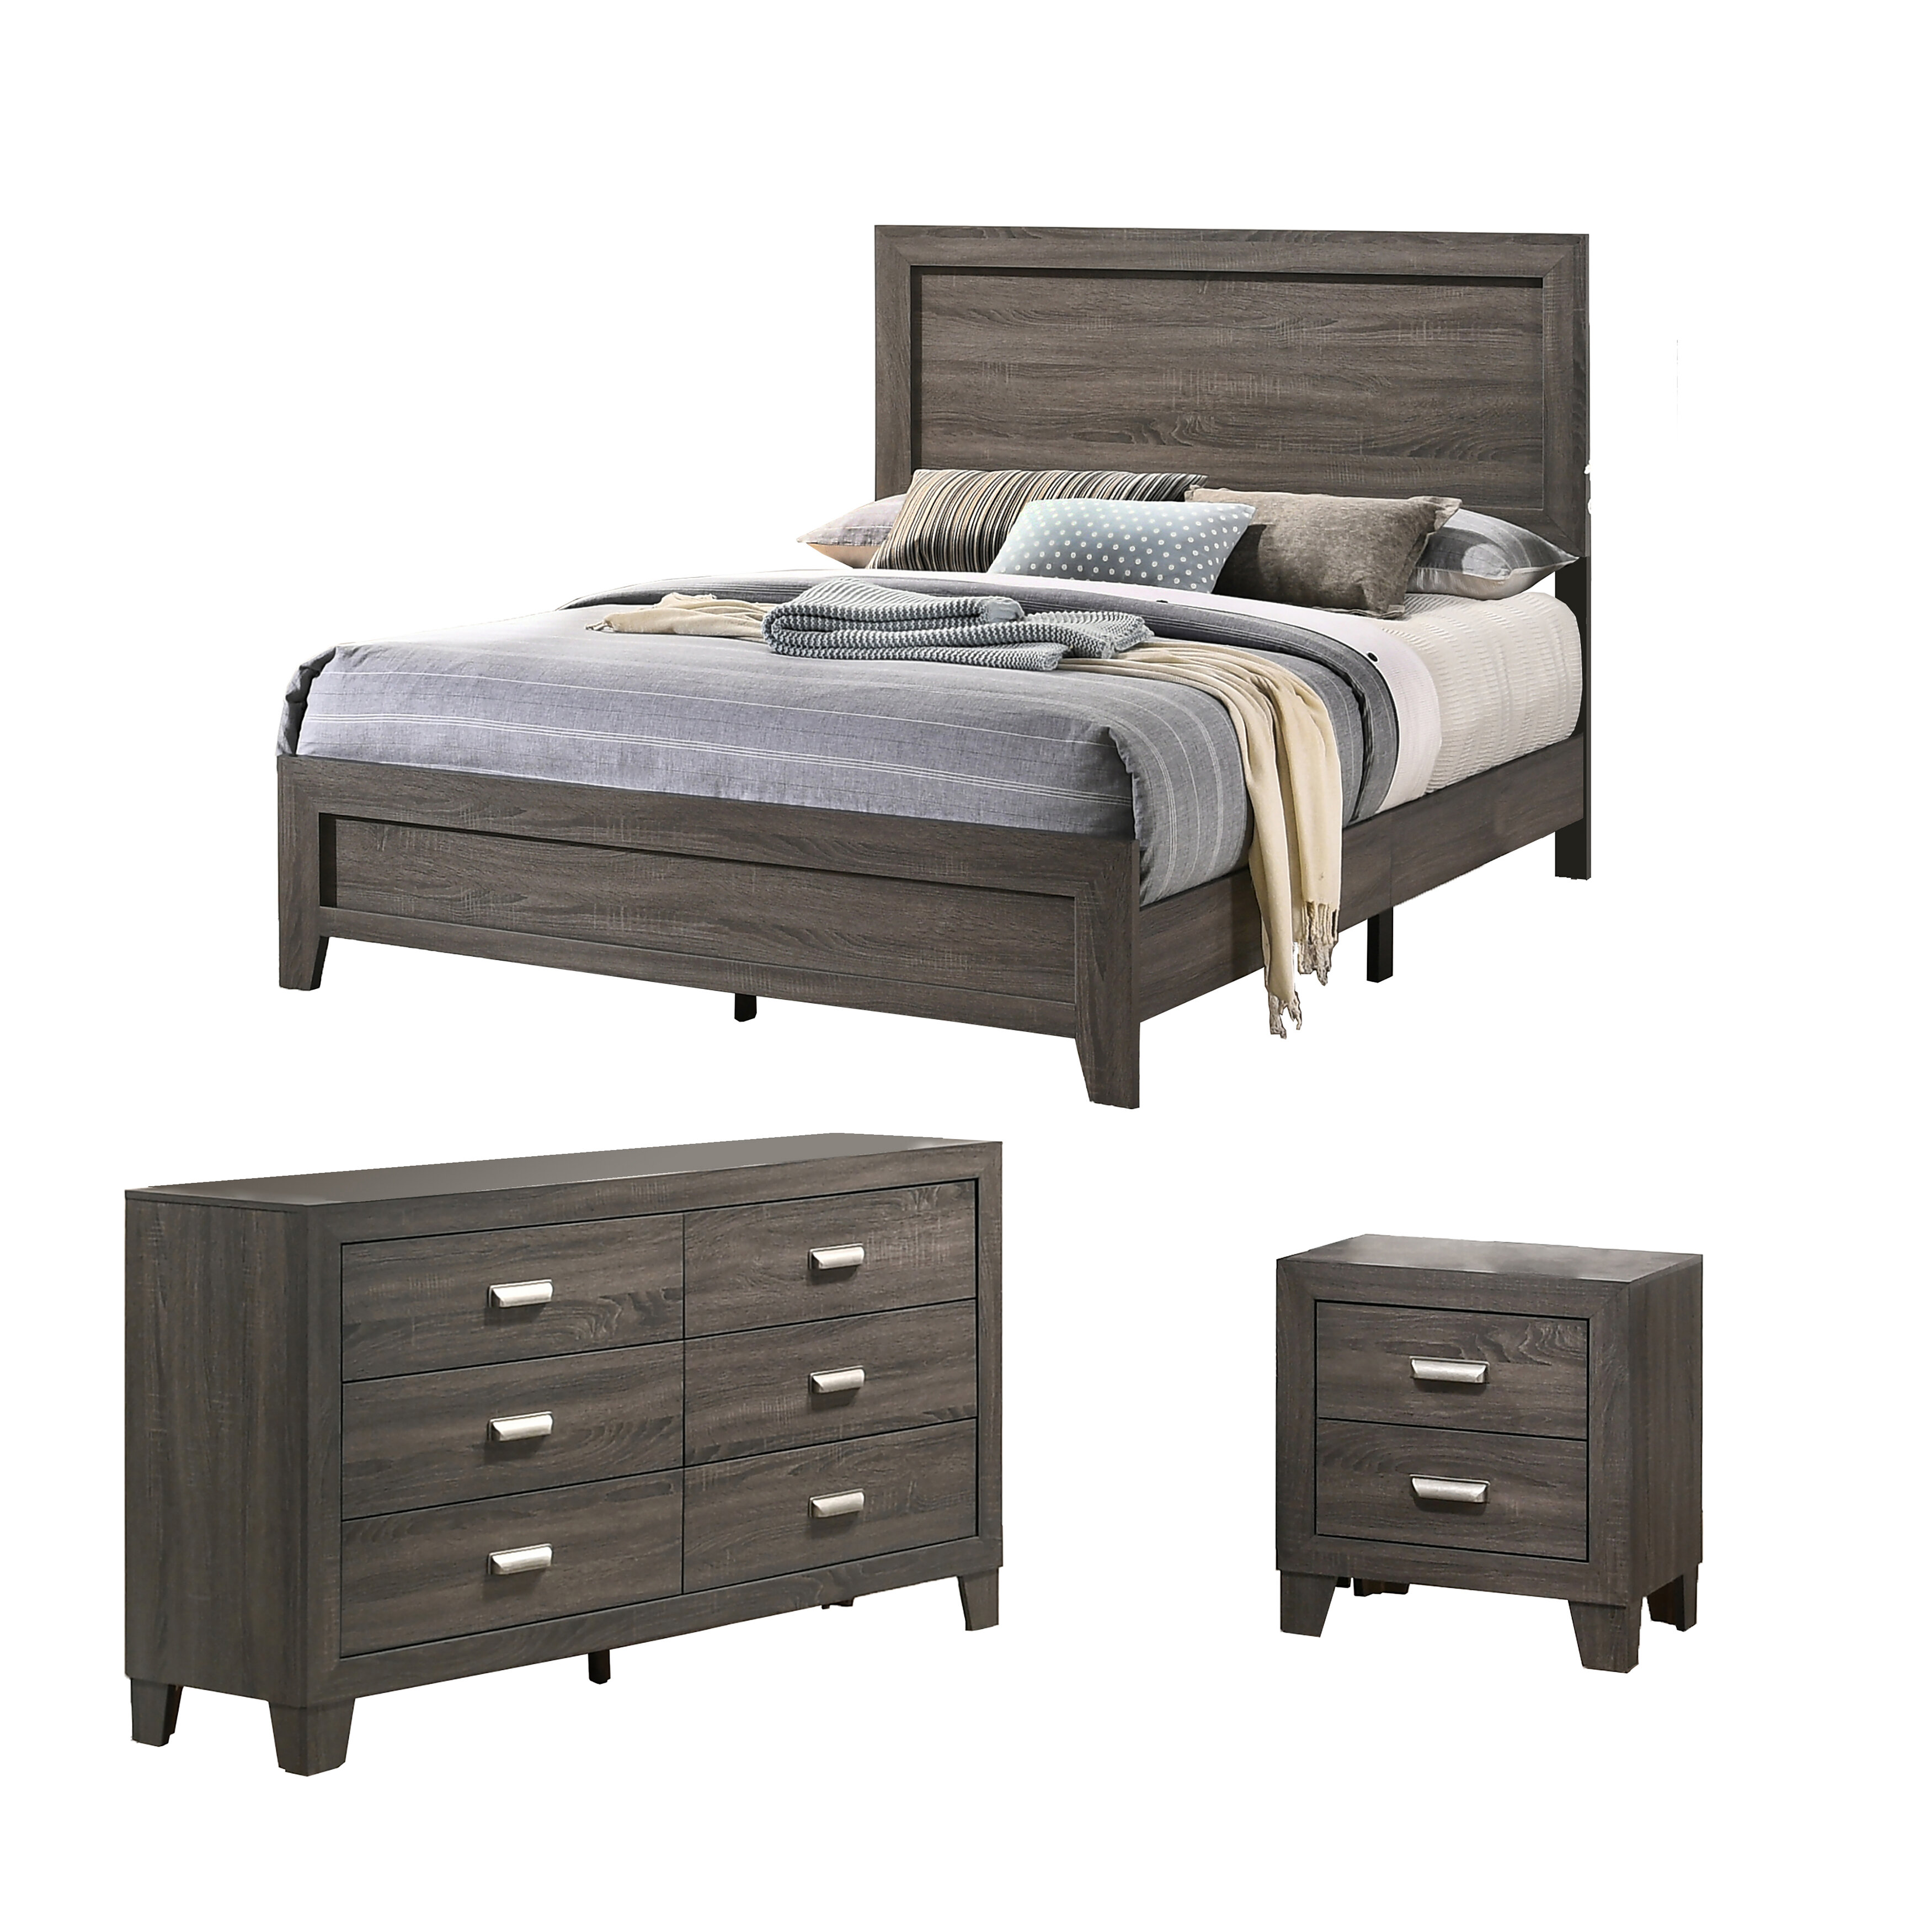 Modern Contemporary Bedroom Sets You Ll Love In 2021 Wayfair